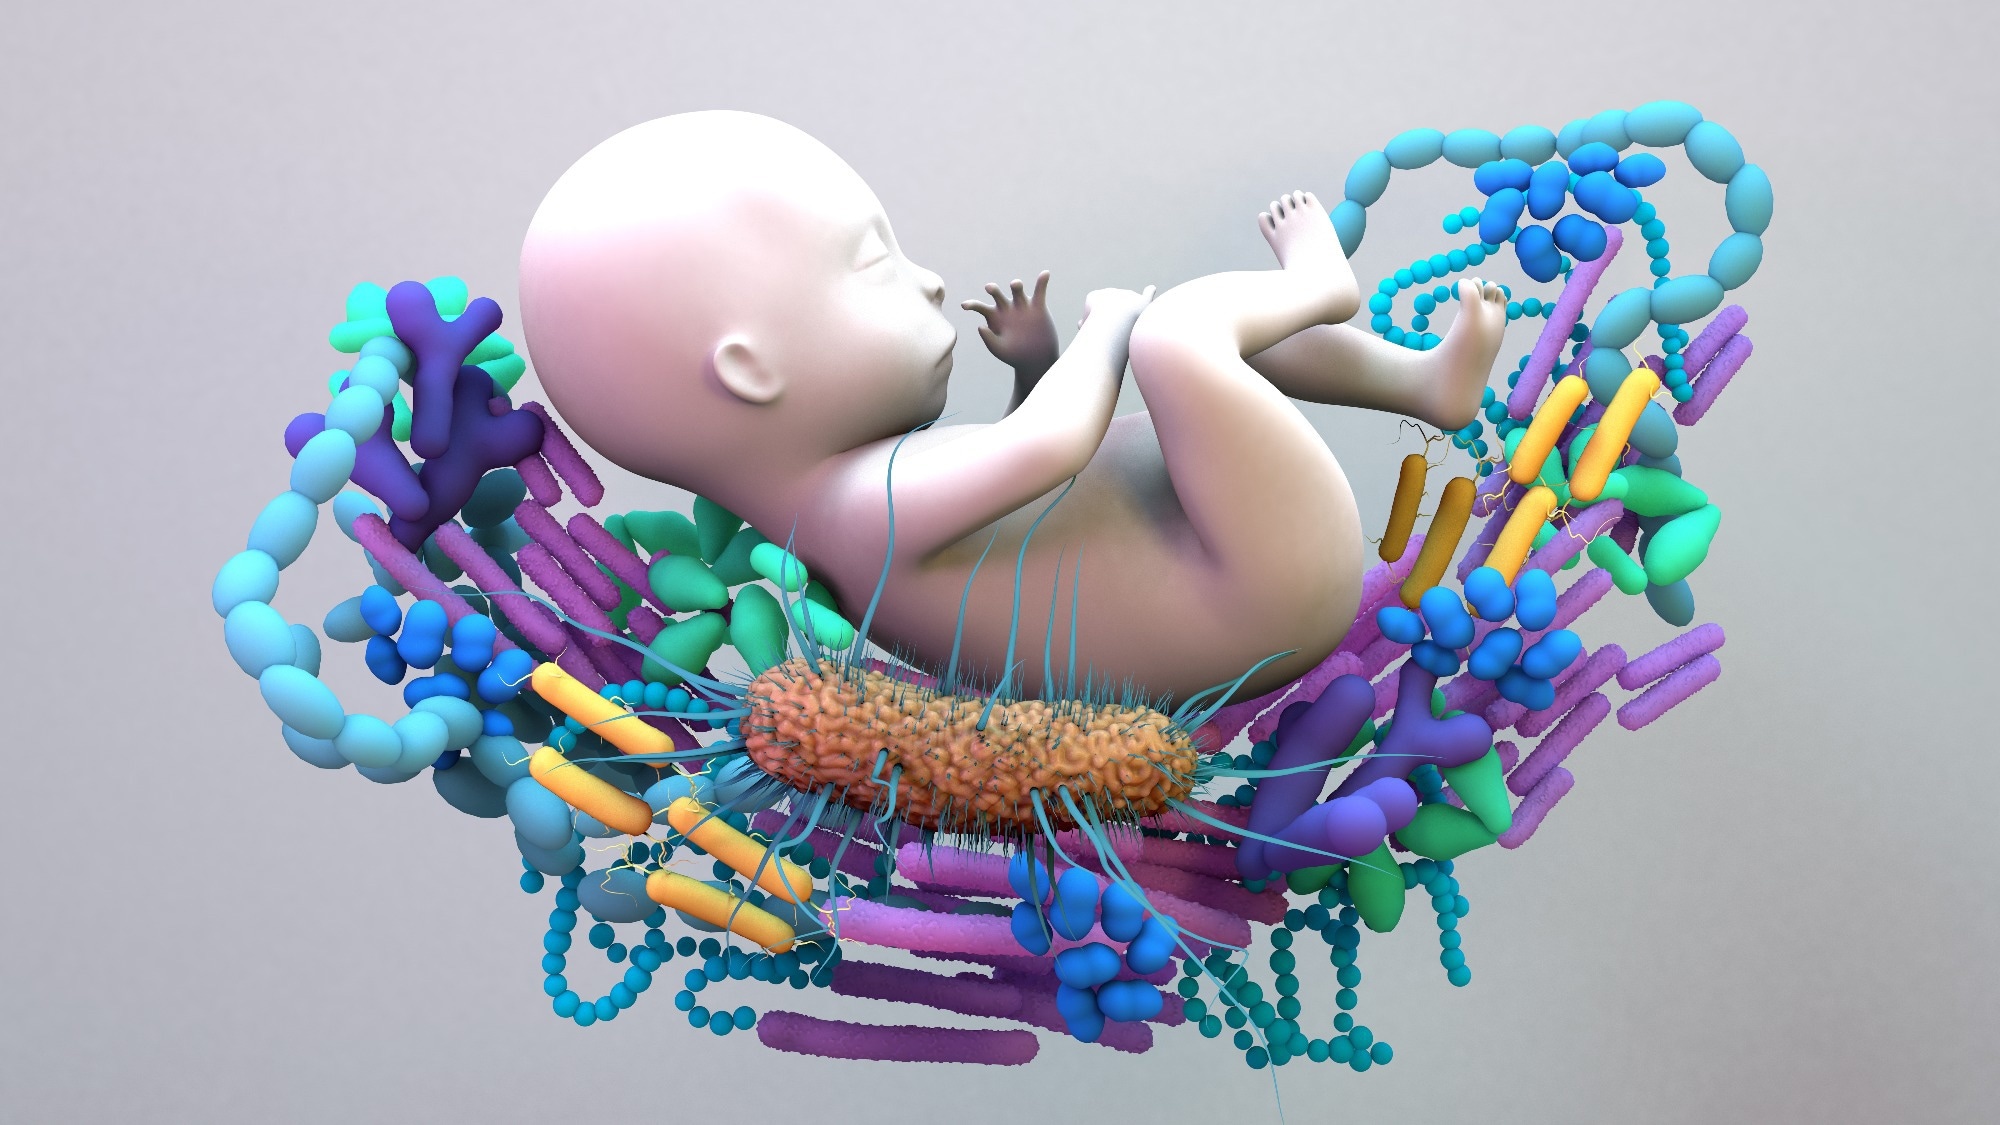 Study: The maternal gut microbiome during pregnancy and its role in maternal and infant health. Image Credit: Design_Cells / Shutterstock